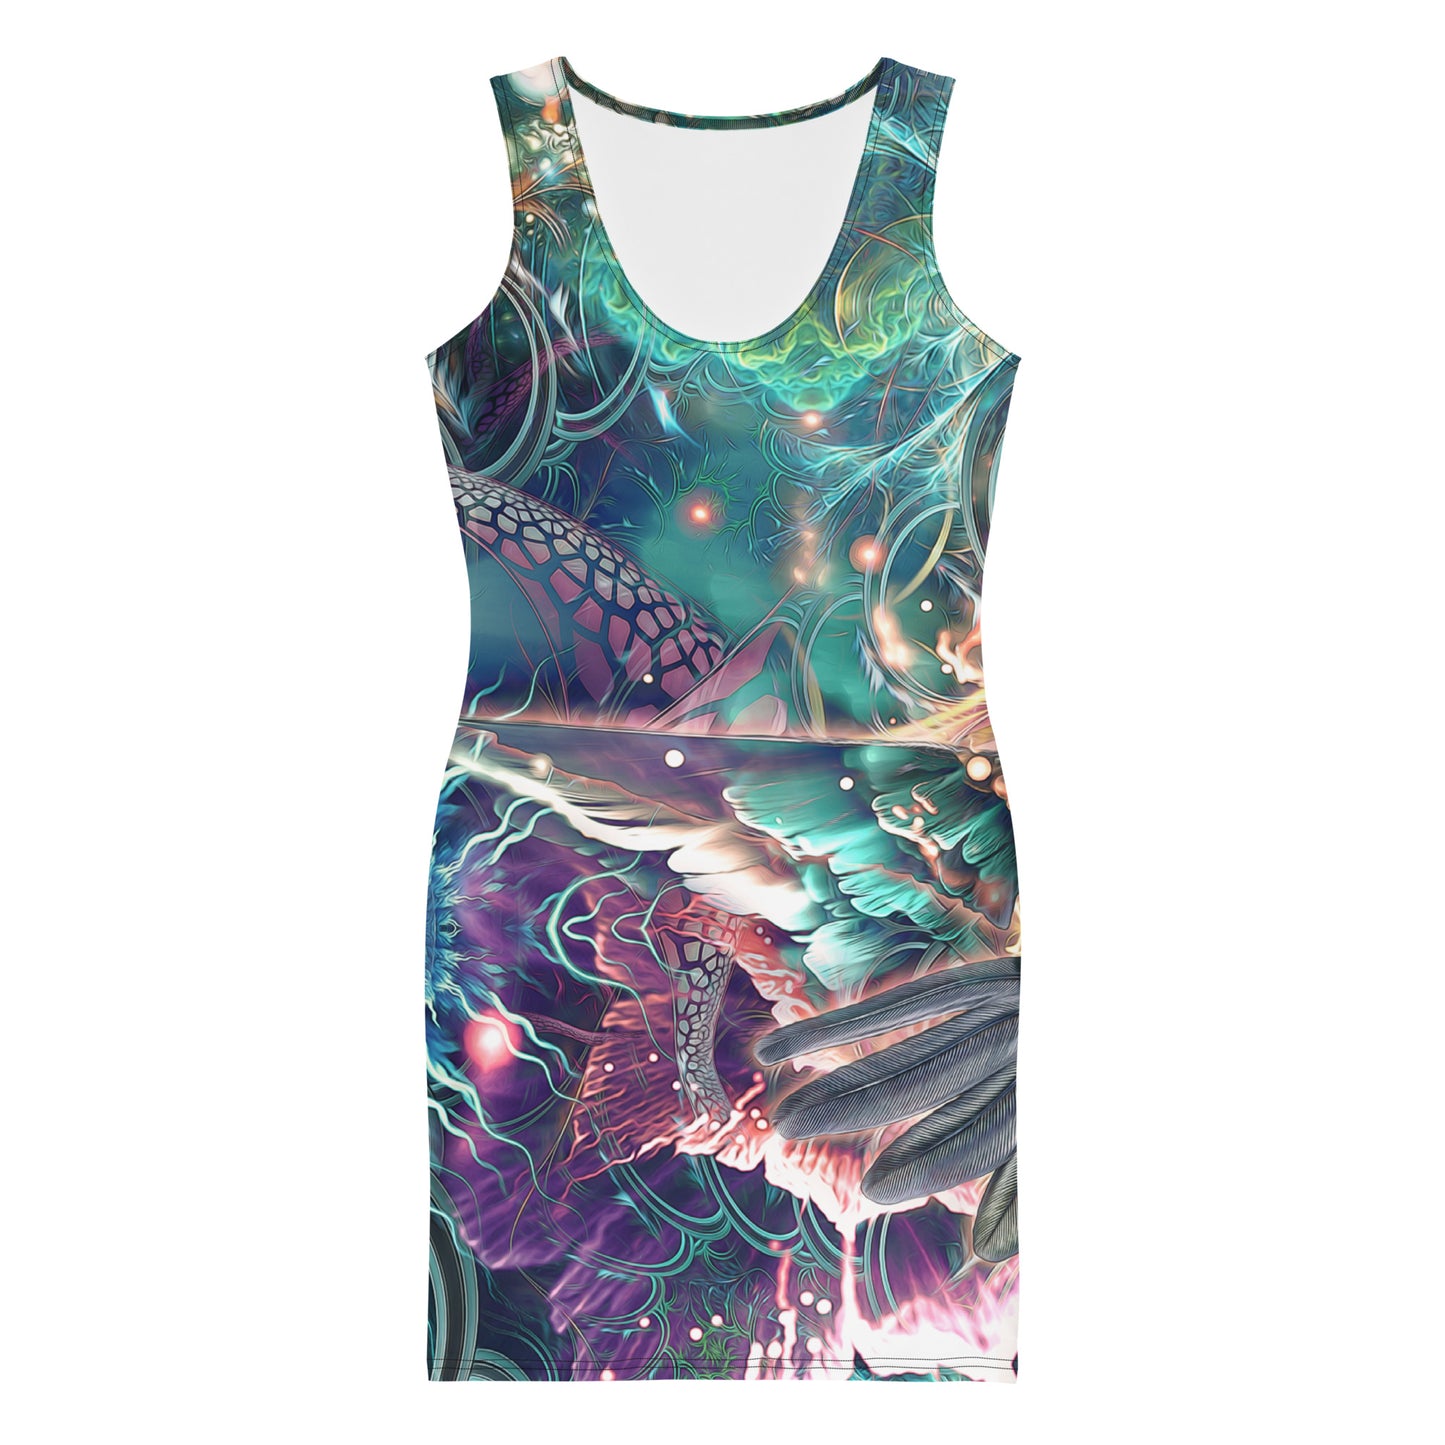 "Nectar (V2)" Bodycon FITTED DRESS